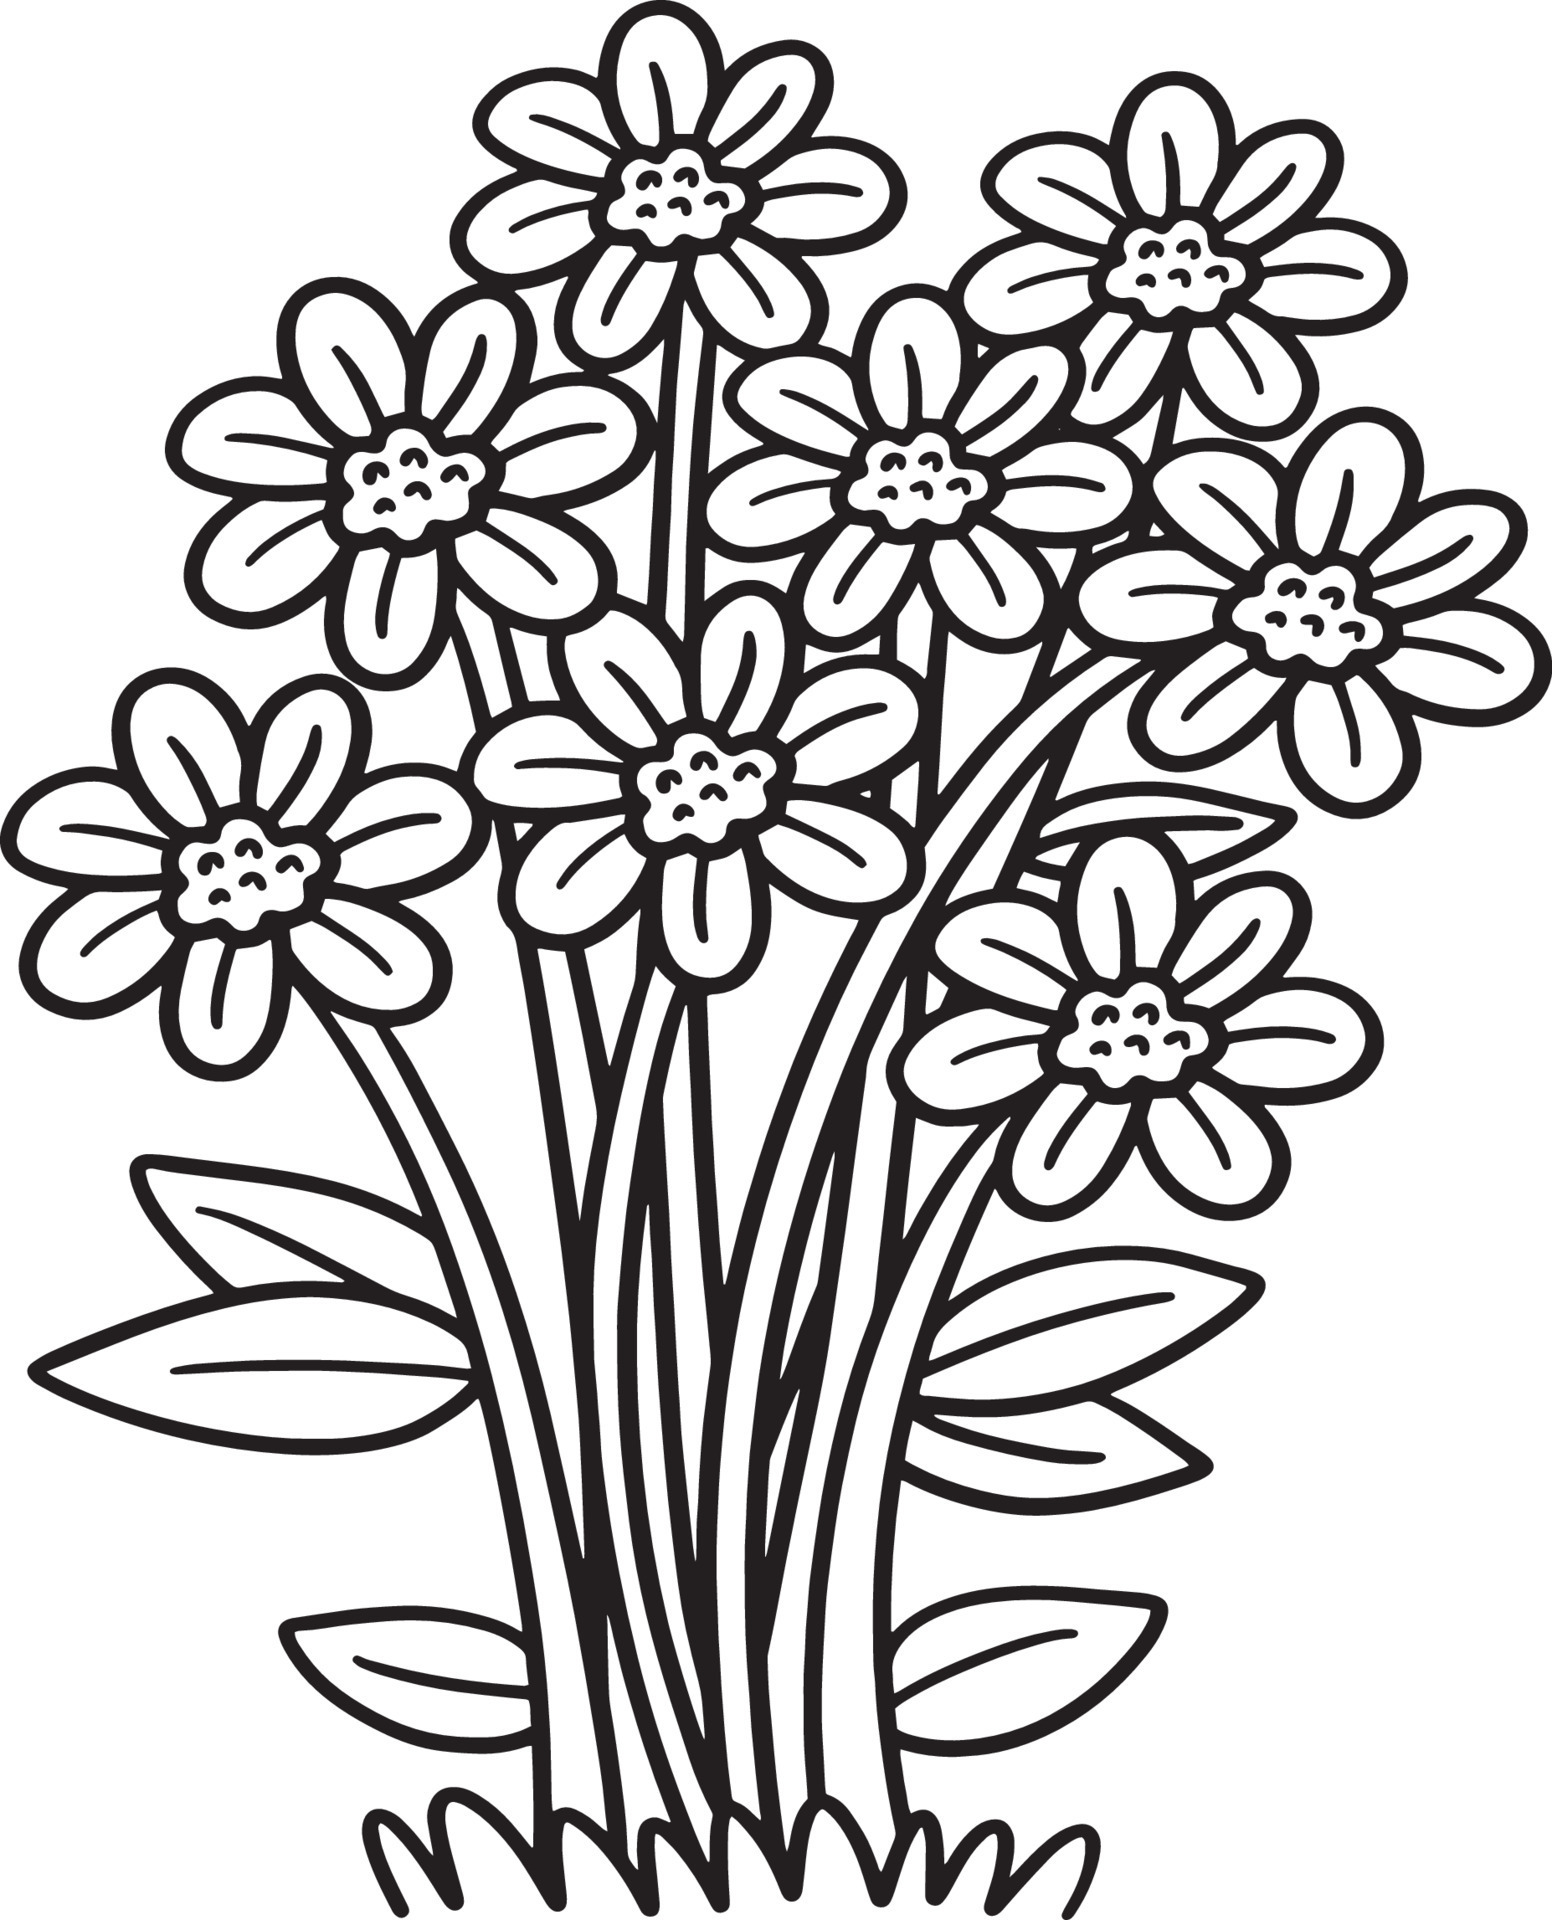 160+ Coloring Page Flowers: Blossom Your Imagination 50